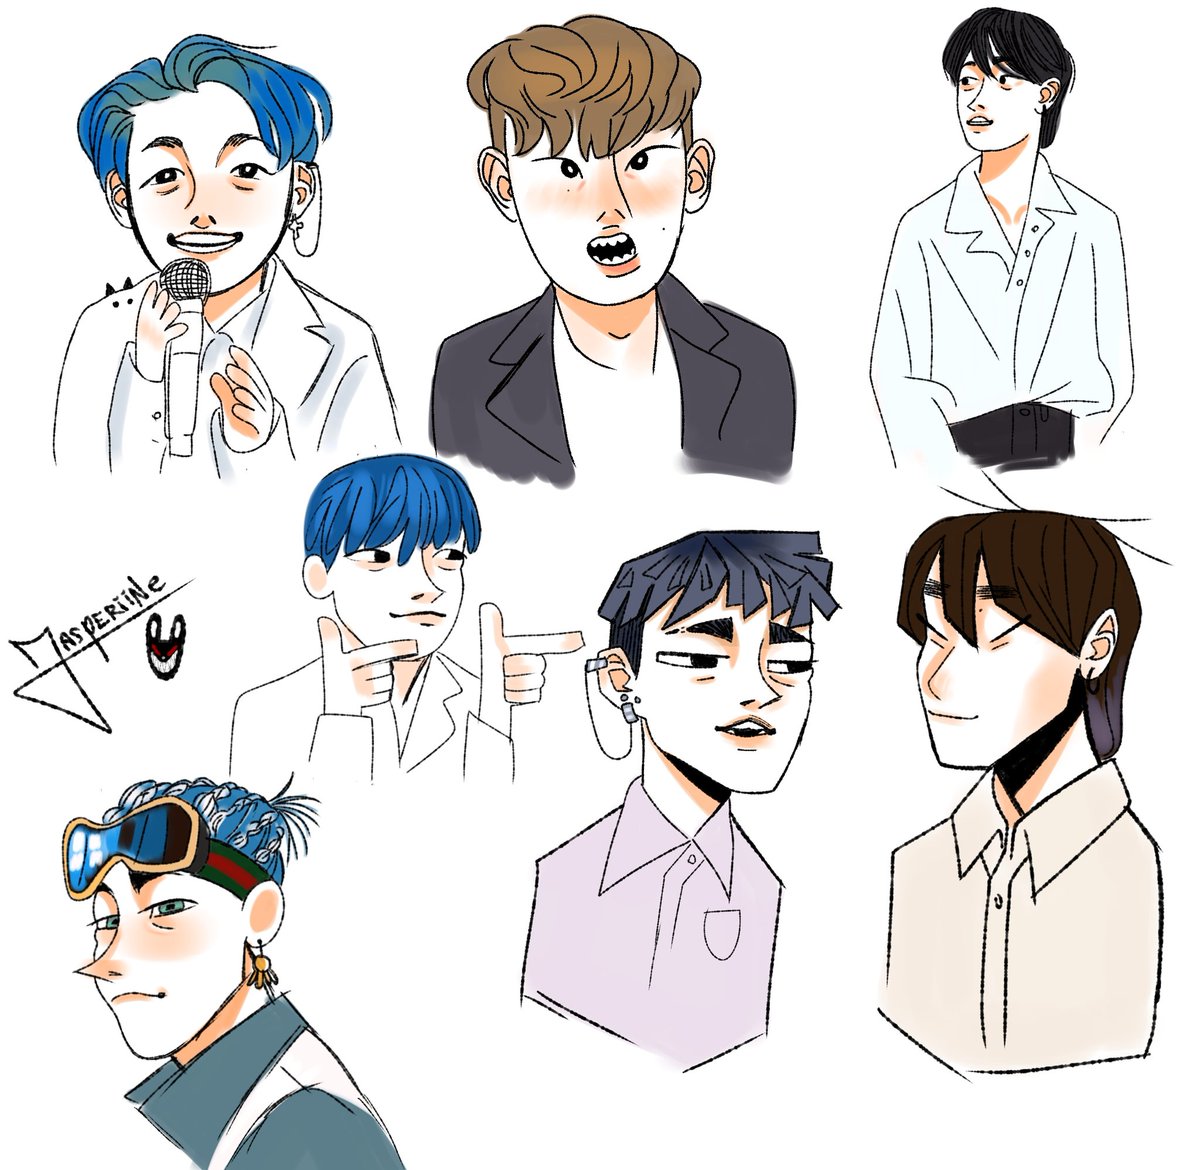 Posting my doodles of Ateez that I kept. It would be really cool if there was a cartoon of them (Yeah I know the great part of them is HJ?)
#ATEEZ #ATEEZfanart #HONGJOONG #SEONGHWA #YUNHO #YEOSANG #CHOISAN #MINGI #WOOYOUNG #JONGHO 